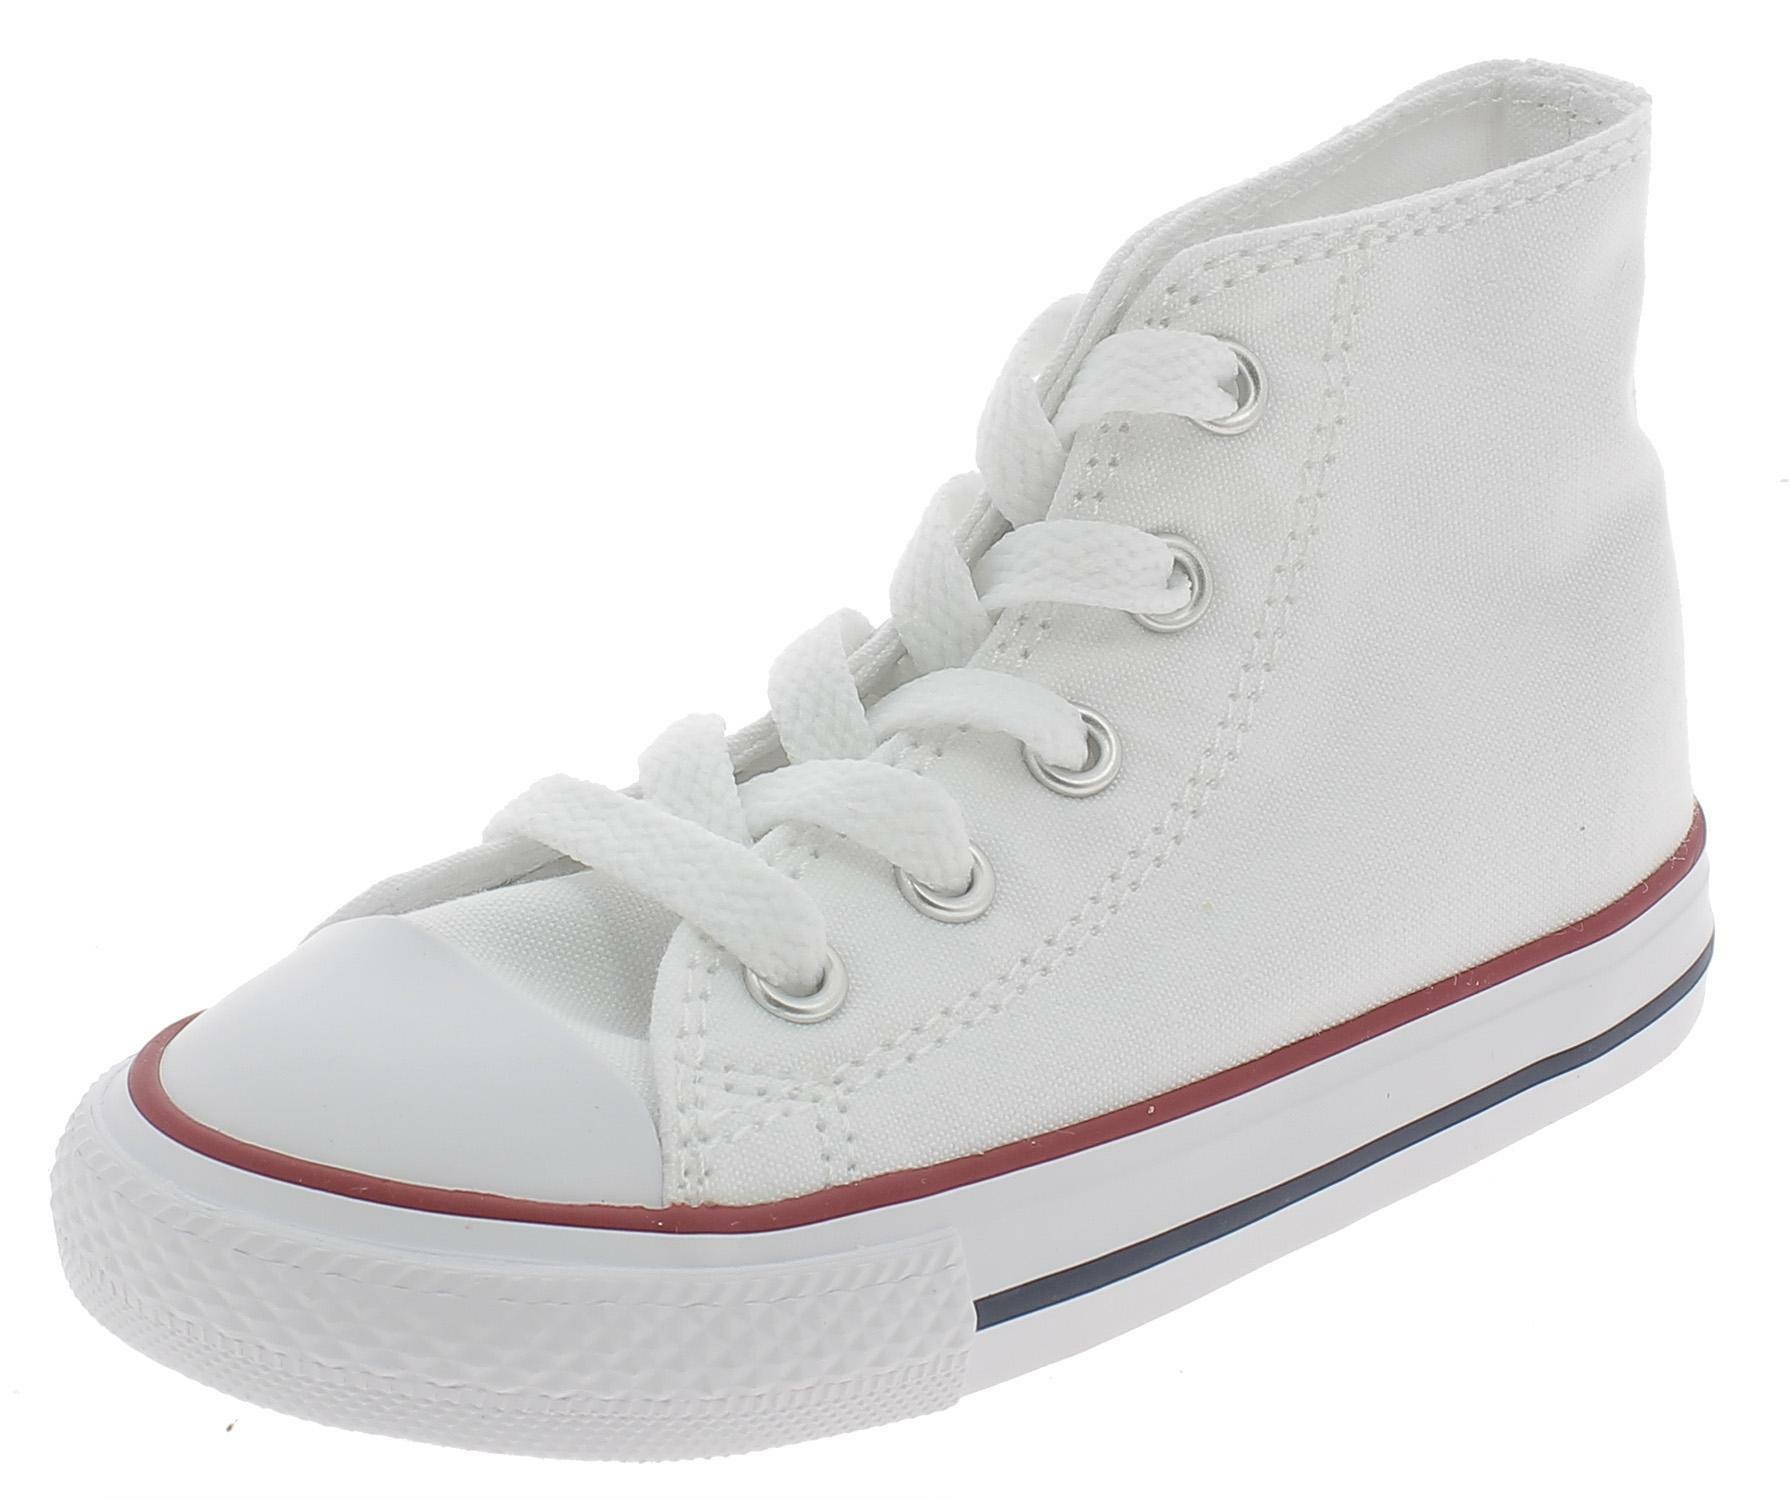 converse bianche 24 hour